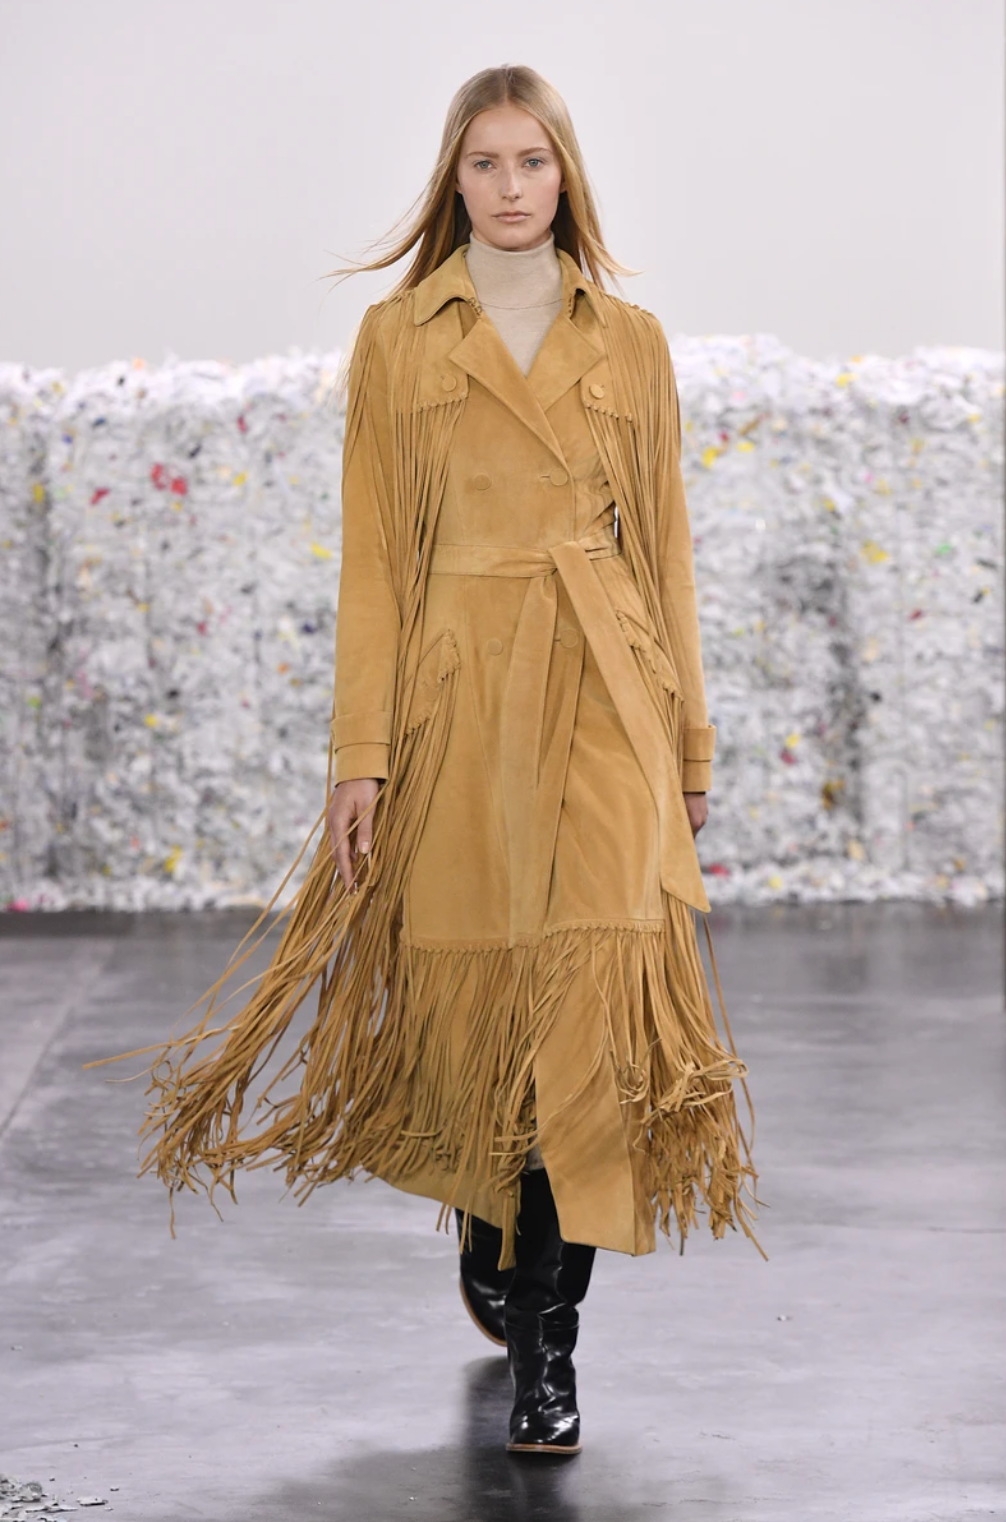  gabriela_hearst_yellow_coat,fw_2020_trends,yellow_tassel_coat,designer_coat_bright_yellow,accouter_group_of_companies,my_home_trend,interior_designer_middle_east,luxury_design,luxury_living,award_winning_interior_design,luxury_interiors_internationa